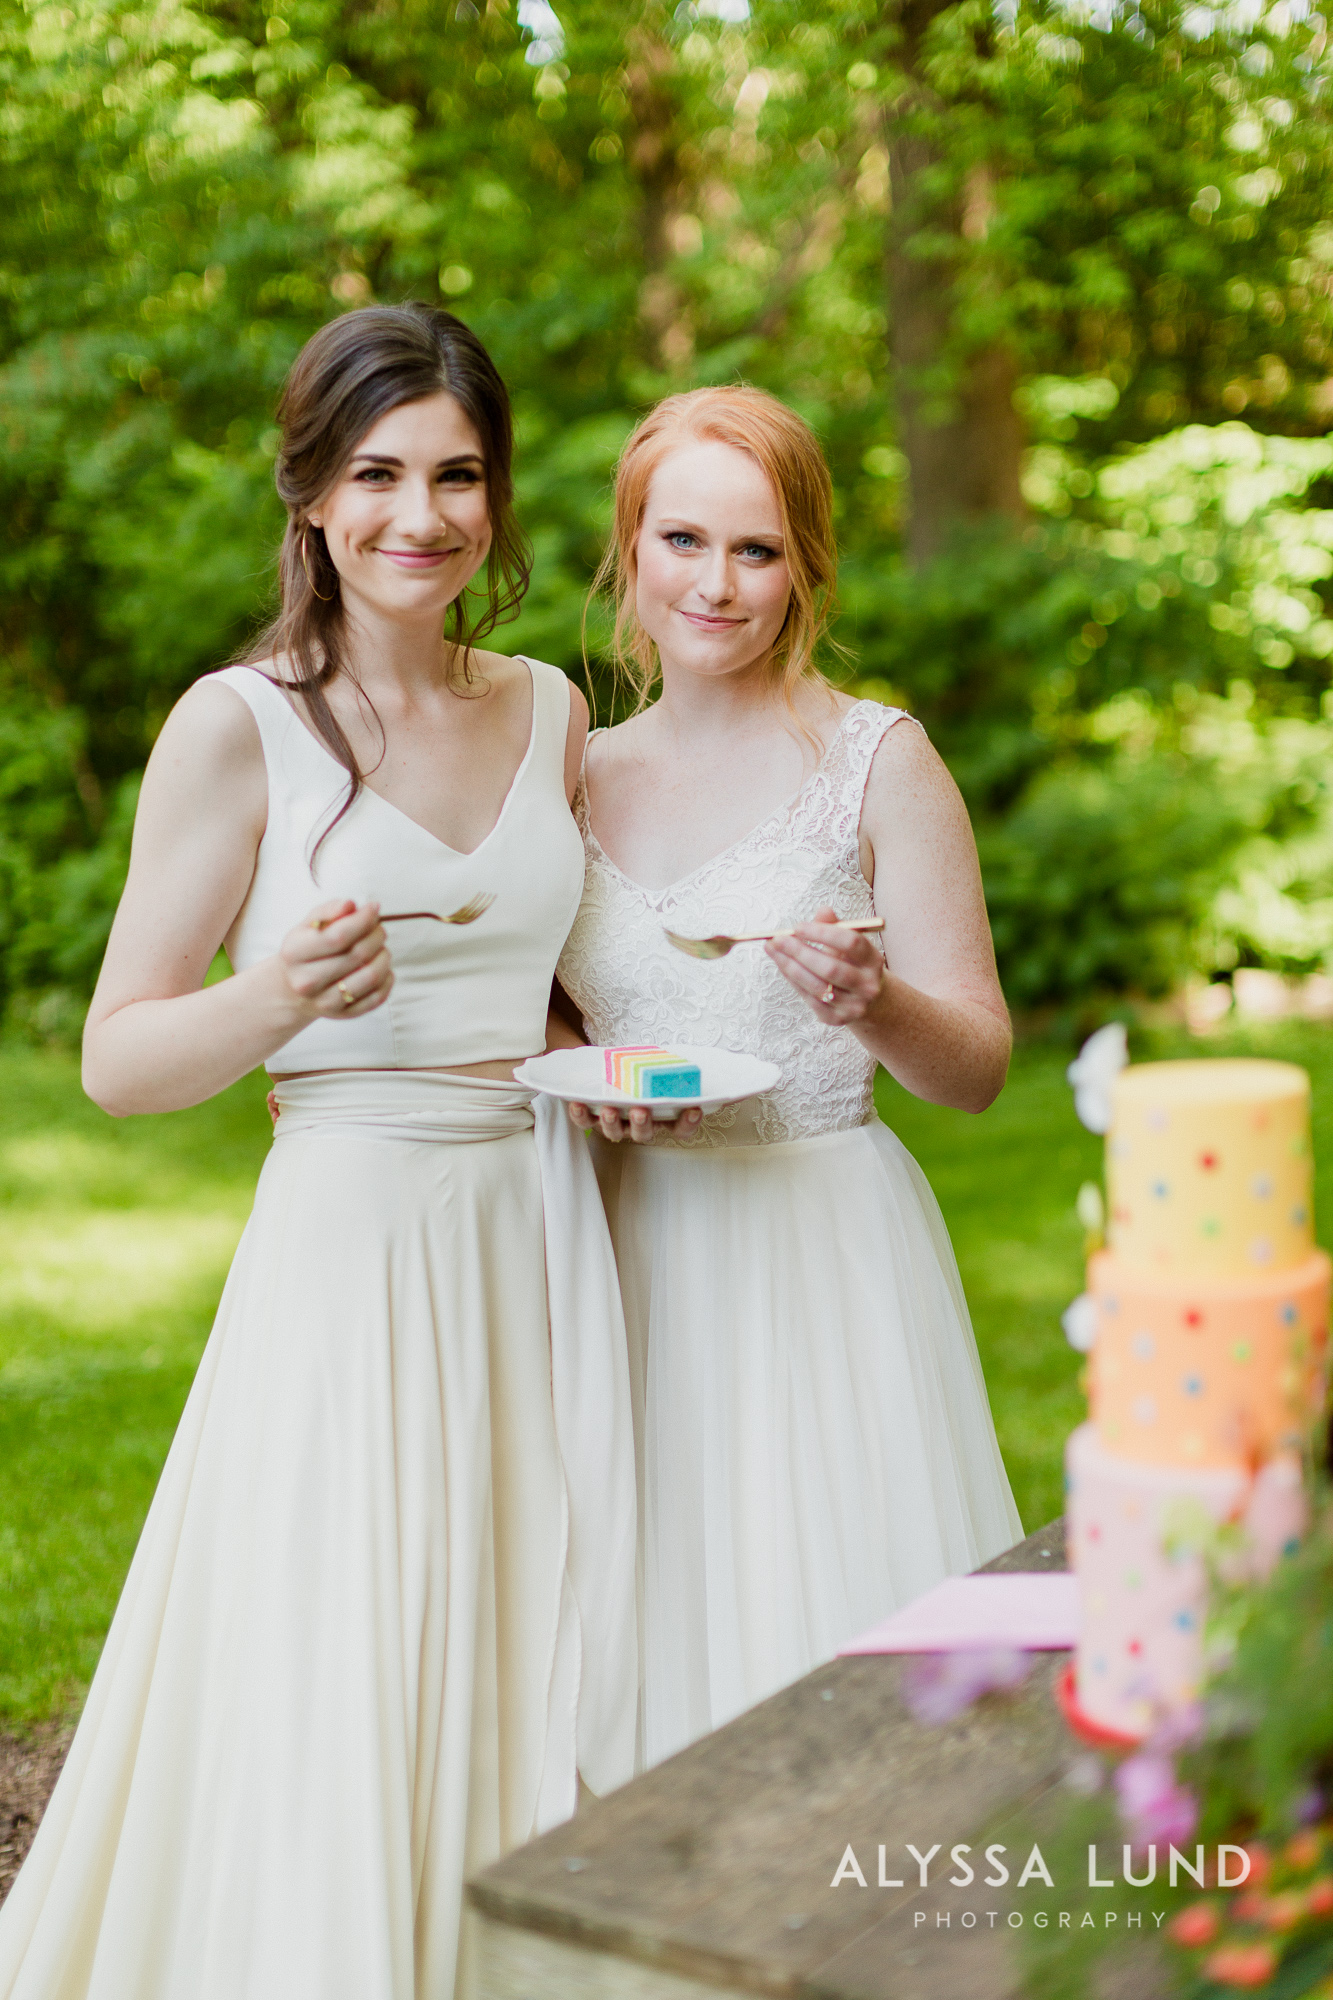 Queer wedding photography inspiration by Alyssa Lund Photography-14.jpg